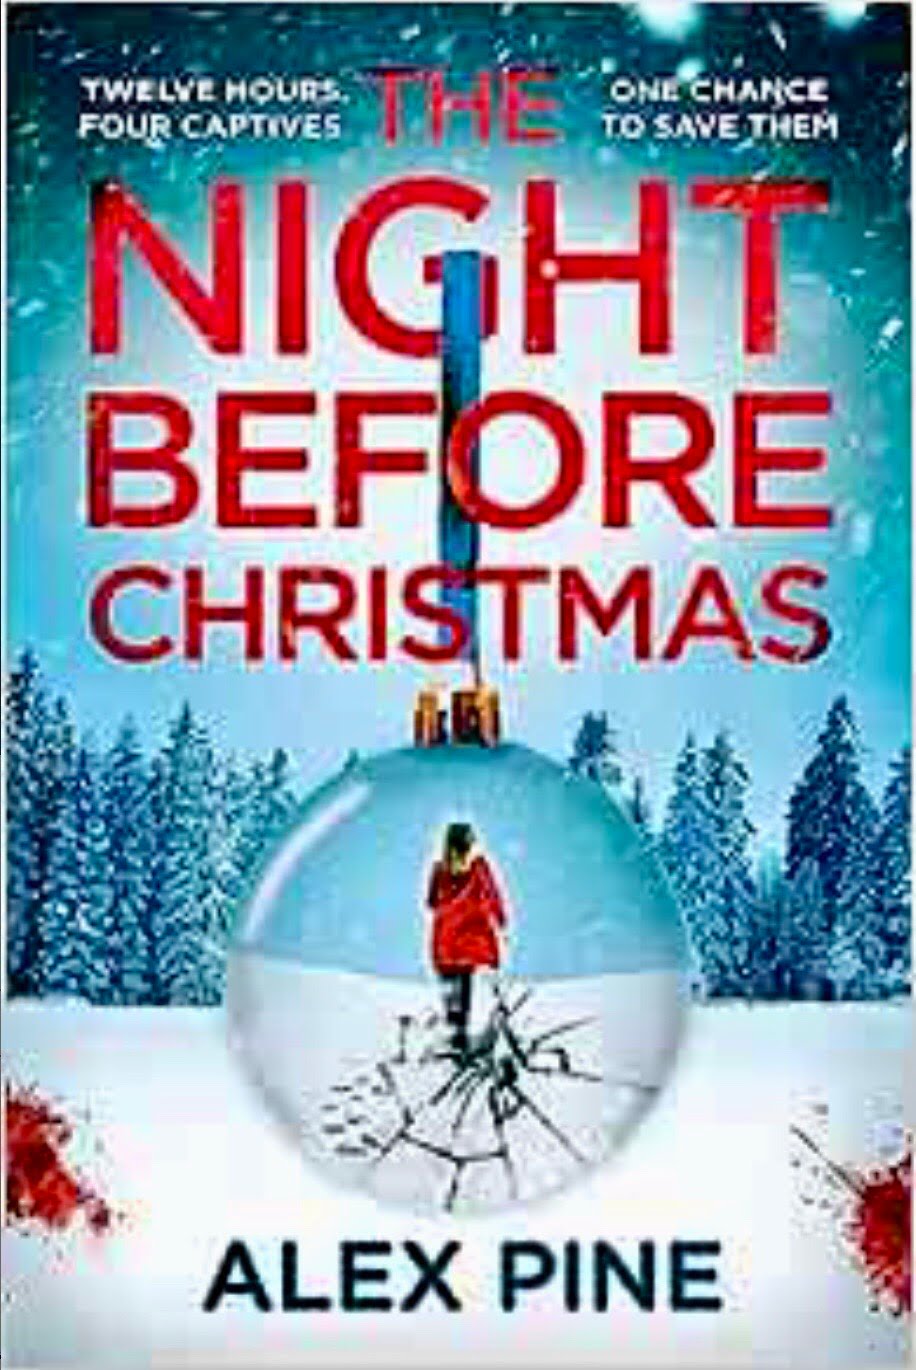 THE NIGHT BEFORE CHRISTMAS BY ALEX PINE – BOOK REVIEW